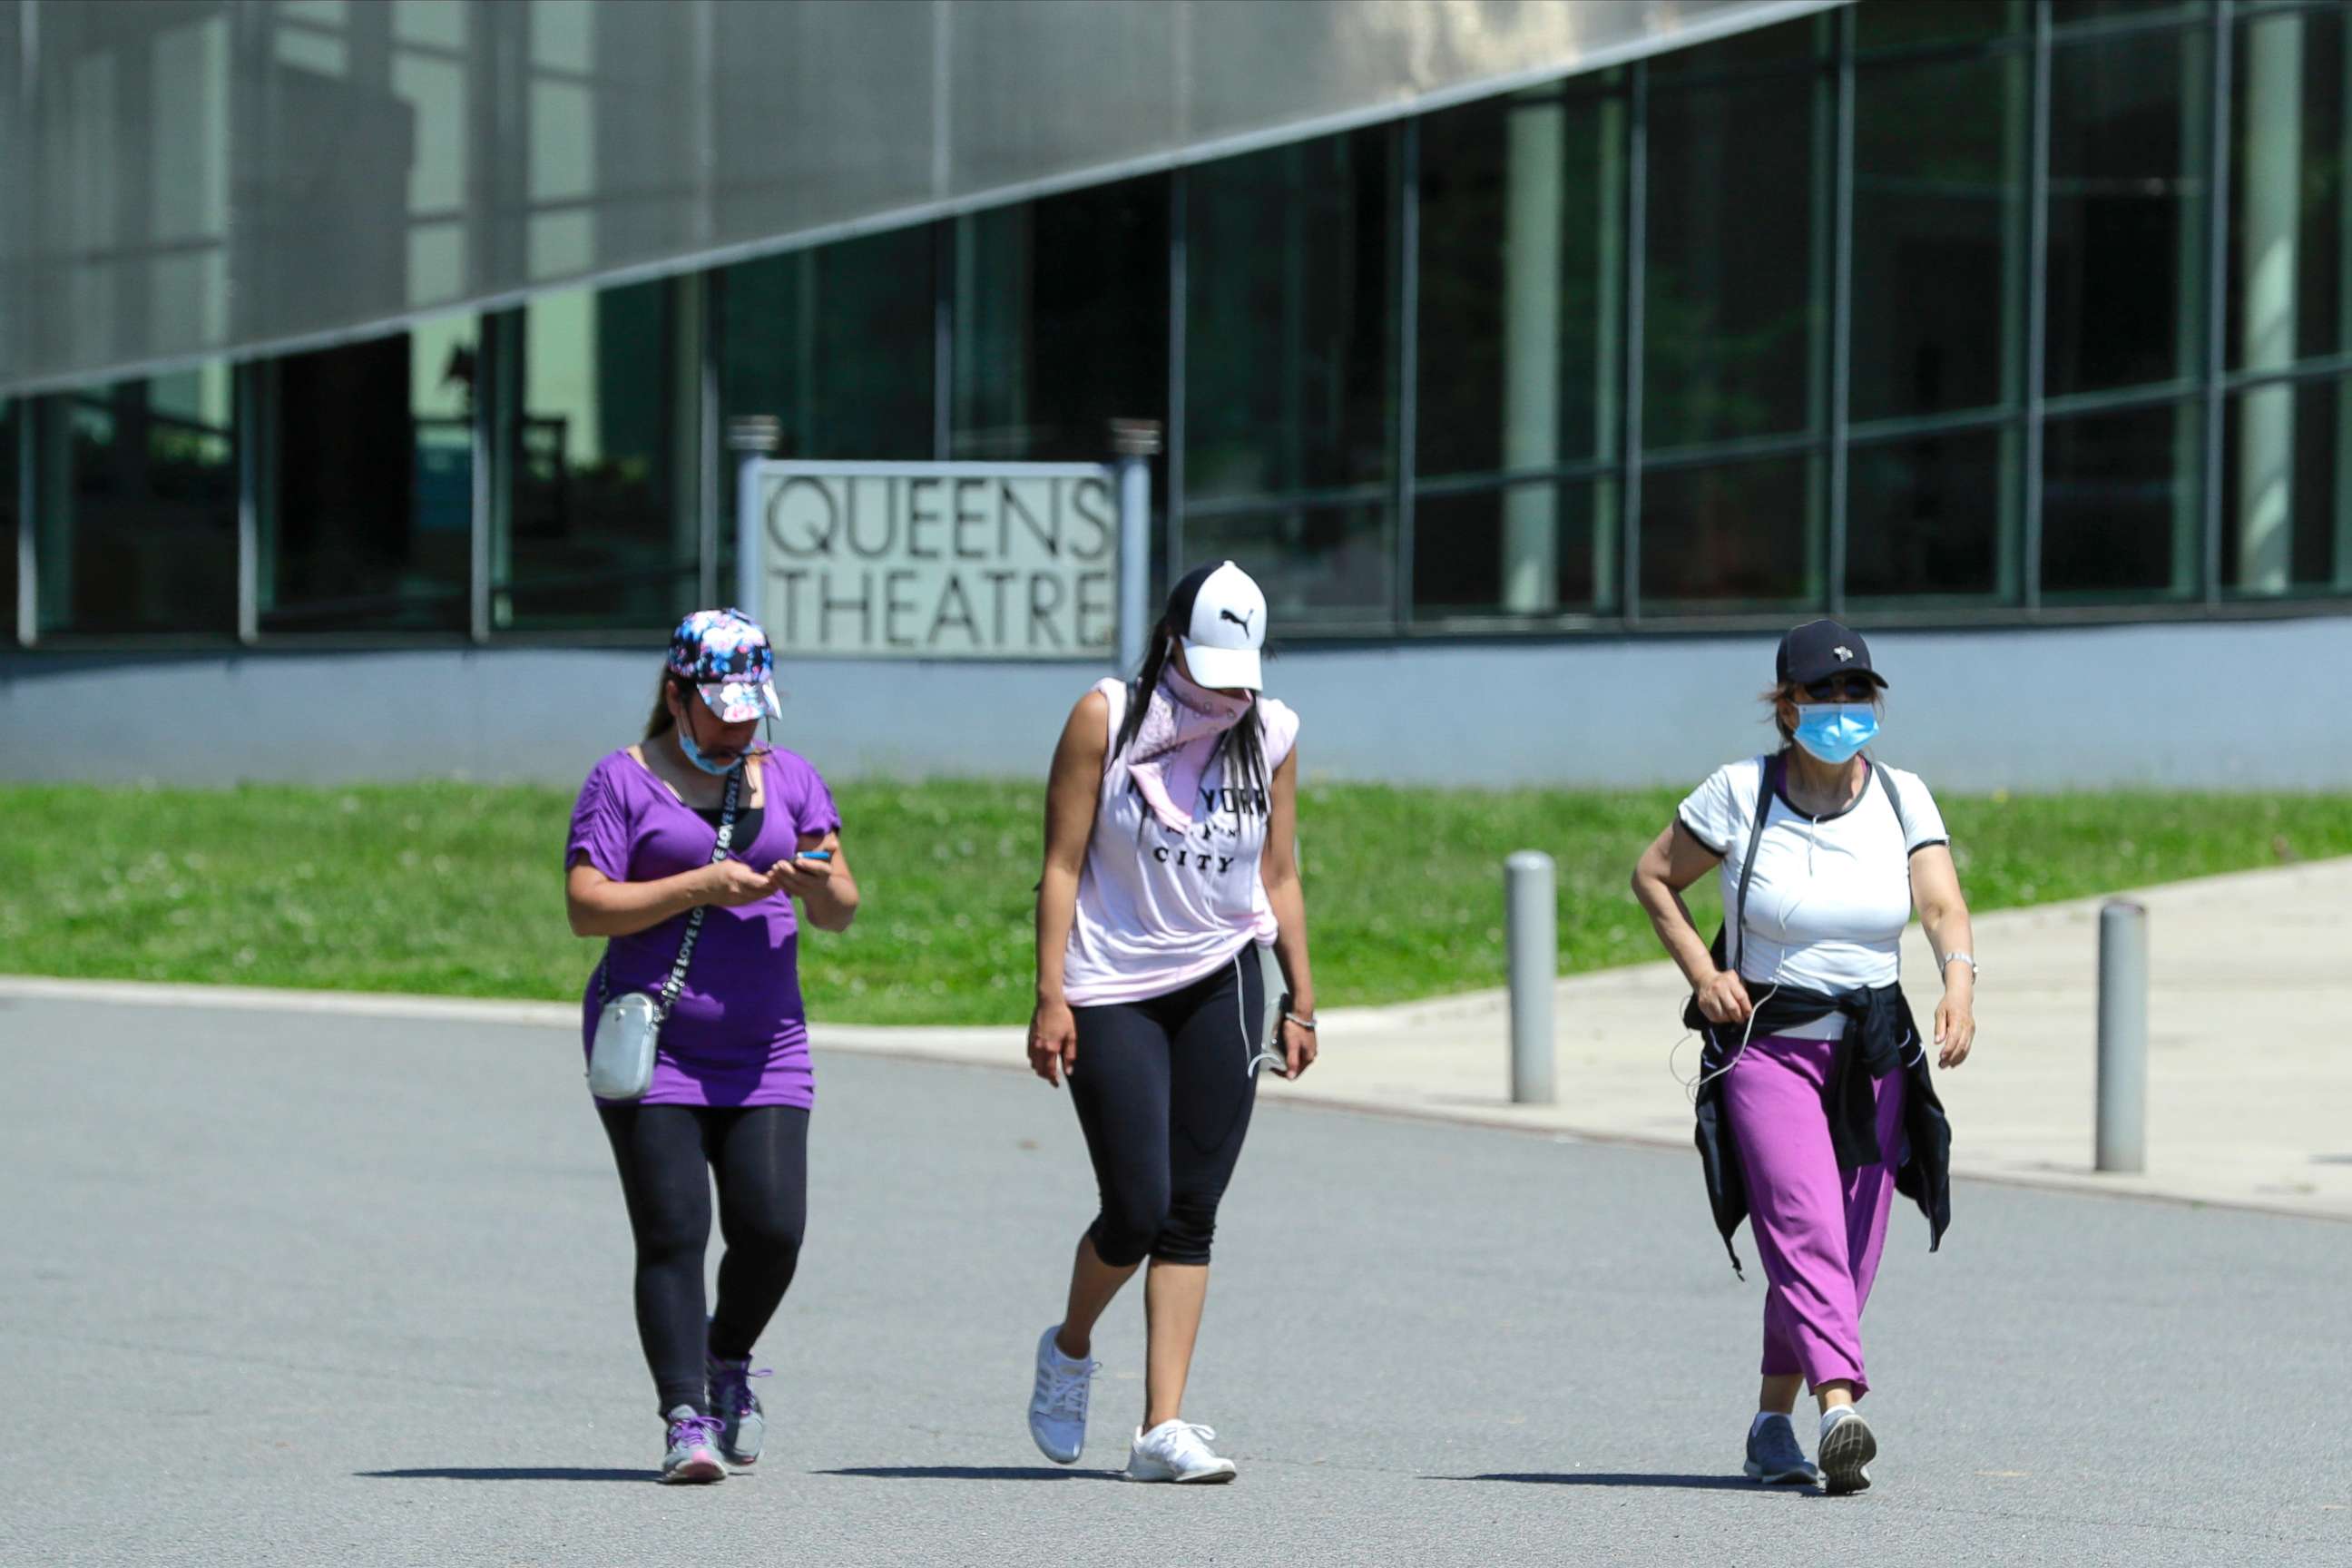 PHOTO: Women wear protective masks during the coronavirus pandemic as they pass the Queens Theatre, Tuesday, May 26, 2020, in the Queens borough of New York. (AP Photo/Frank Franklin II)